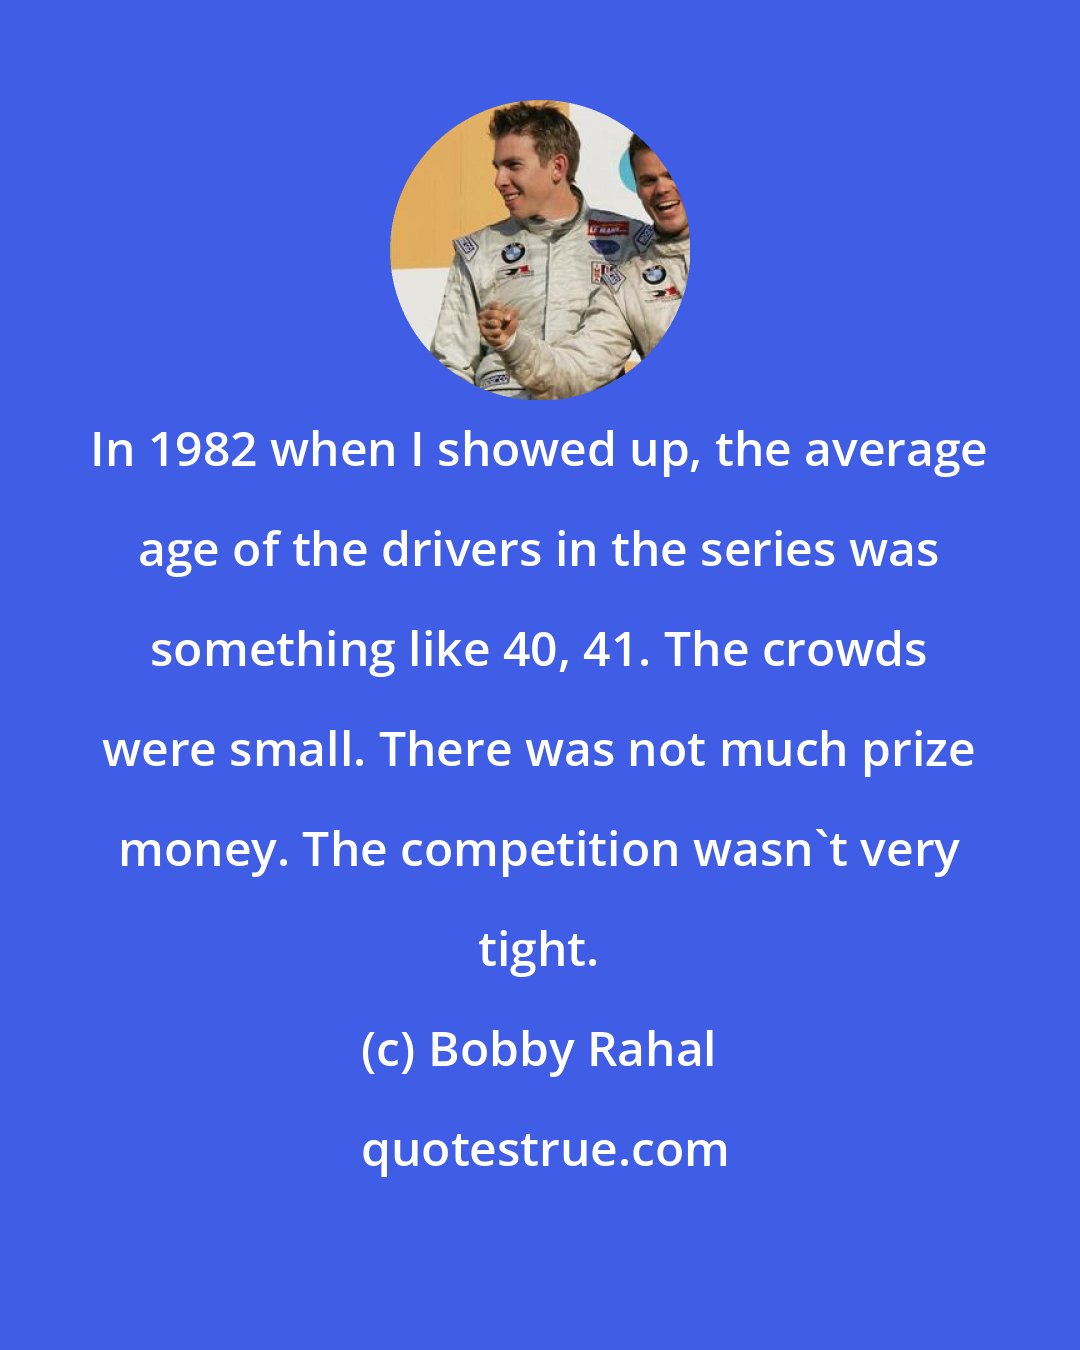 Bobby Rahal: In 1982 when I showed up, the average age of the drivers in the series was something like 40, 41. The crowds were small. There was not much prize money. The competition wasn't very tight.